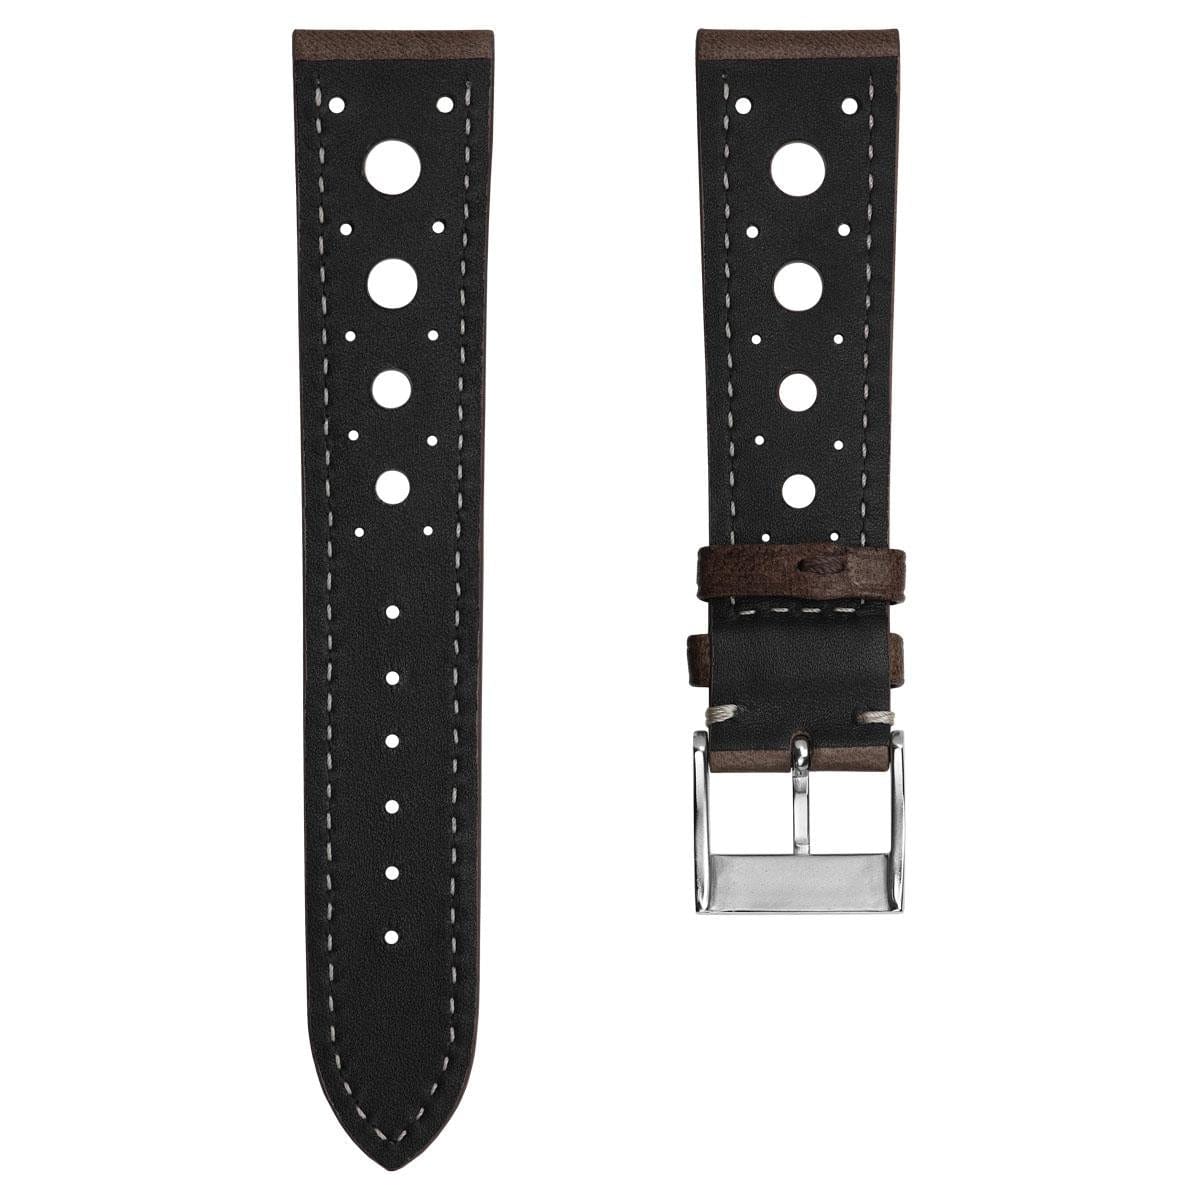 Boutsen Cavallo Racing Handmade Leather Watch Strap - Cacao